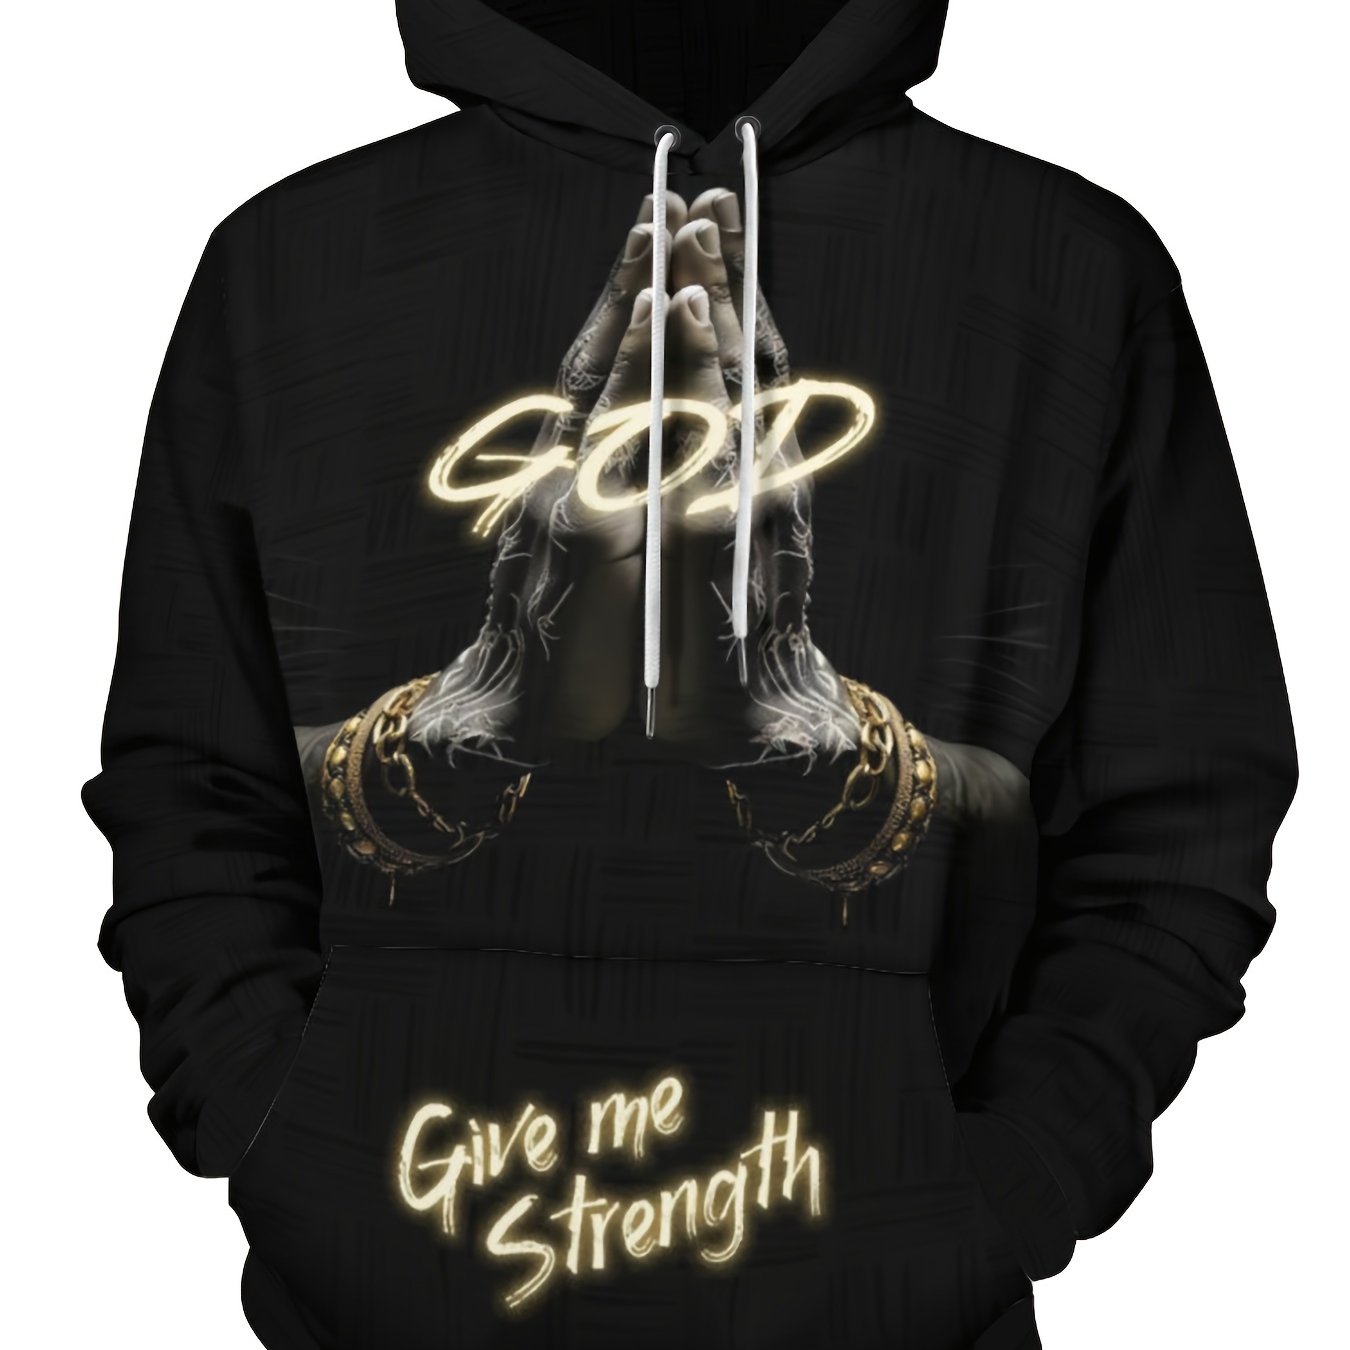 GOD Print Hoodie, Cool Hoodies For Men, Men's Casual Graphic Design Pullover Hooded Sweatshirt With Kangaroo Pocket Streetwear For Winter Fall, As Gifts